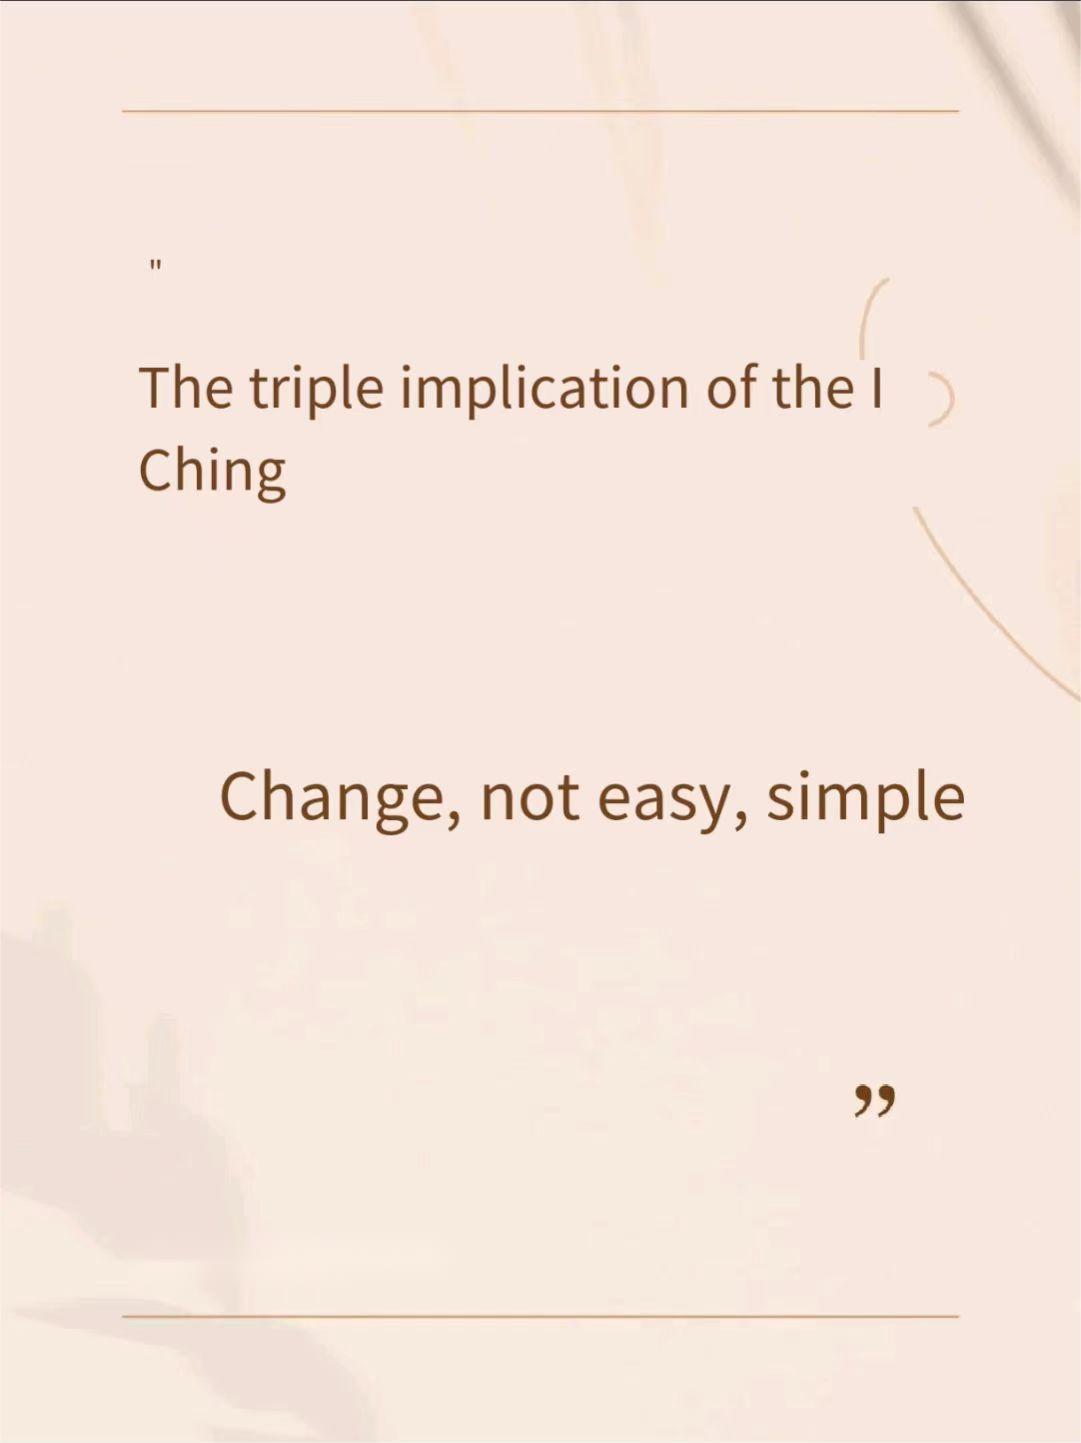 Changes in the Book of Changes, Simple and Difficult